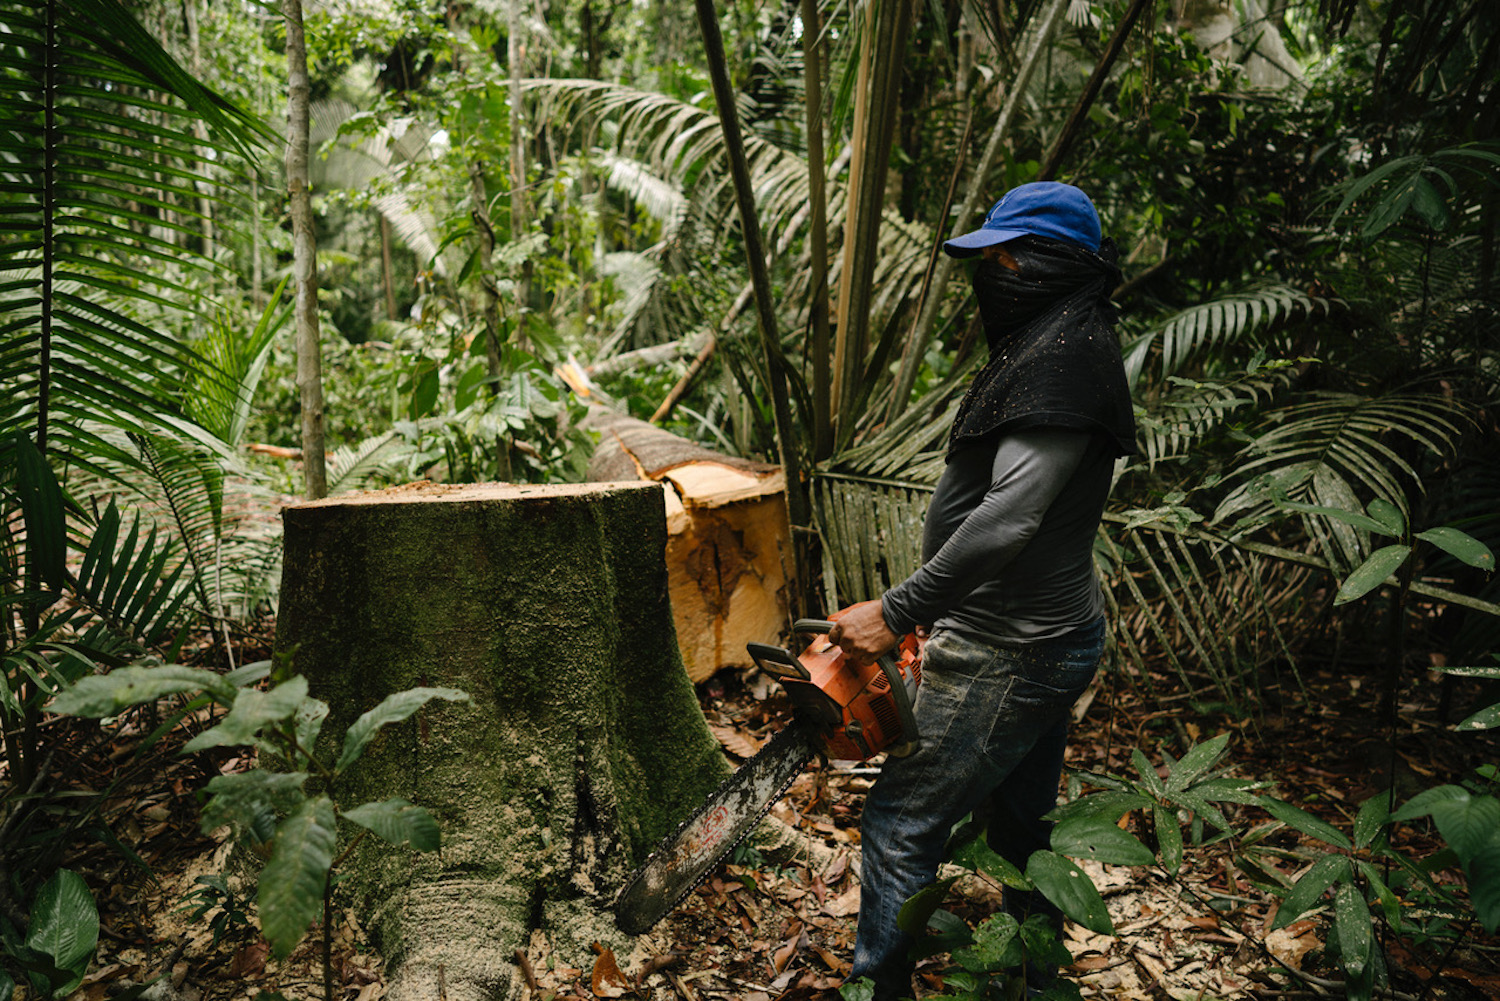 A logger cuts a tree deep in the Amazon. Photo by Daniel